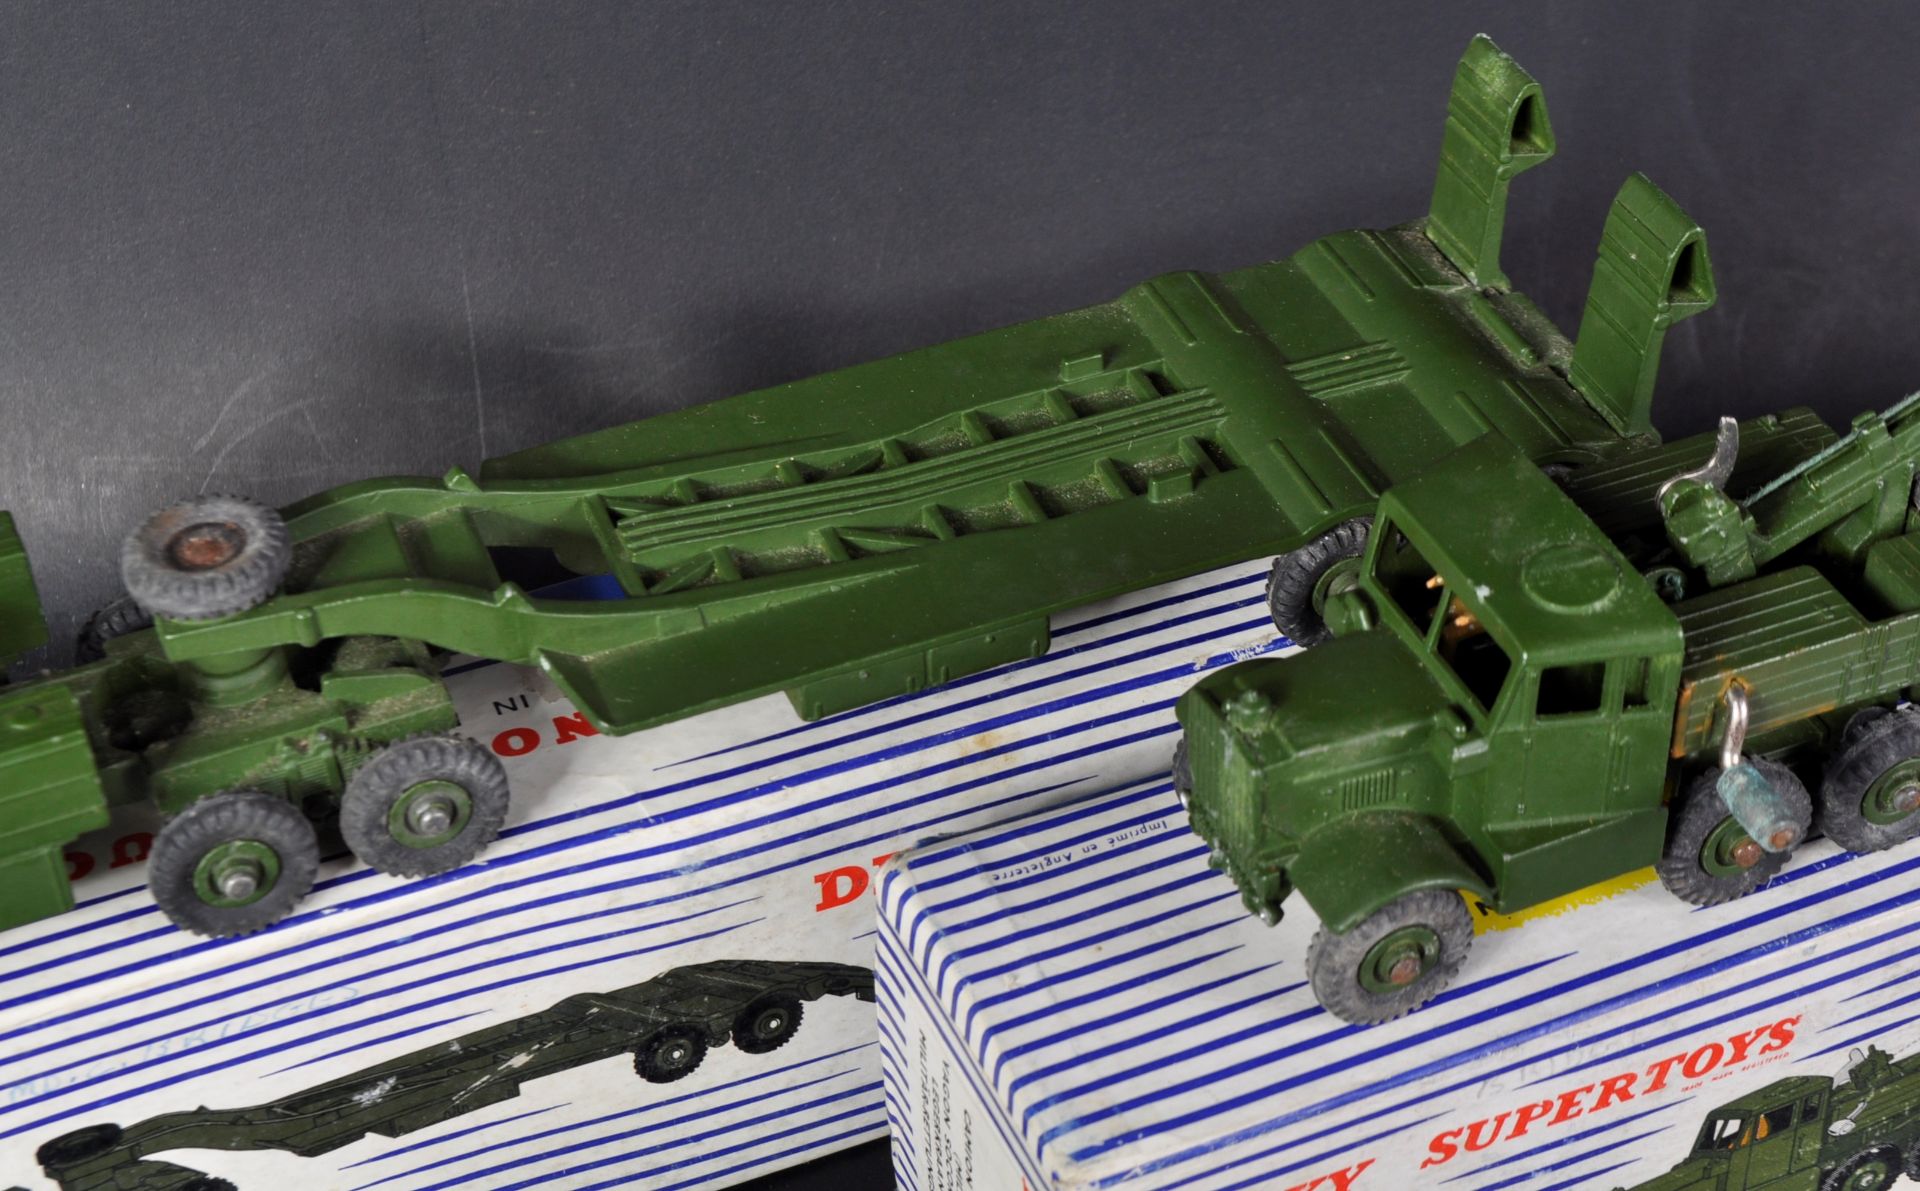 COLLECTION OF VINTAGE DINKY SUPERTOYS MILITARY INTEREST DIECAST - Image 3 of 7